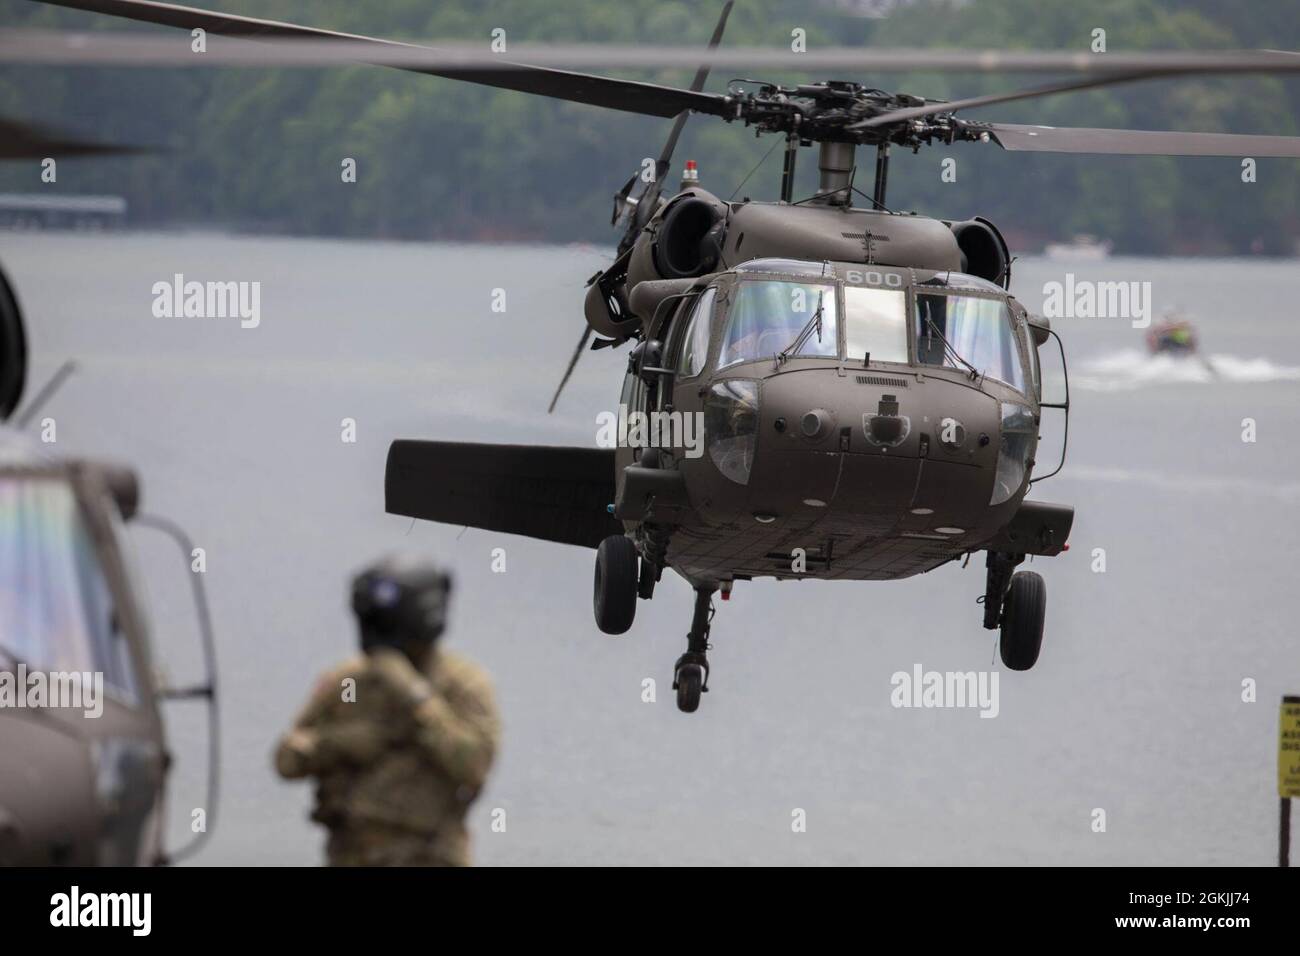 A UH-60 Black Hawk Helicopter, assigned to Alpha Company, 1st Battalion, 171st Aviation Regiment, flies into land on the landing zone at War Hill Park, Lake Lanier, Dawsonville, Ga., May 5, 2021. This Black Hawk is conducting an Airborne Operation for the Army Rangers and to stay current in their flight hours. Stock Photo